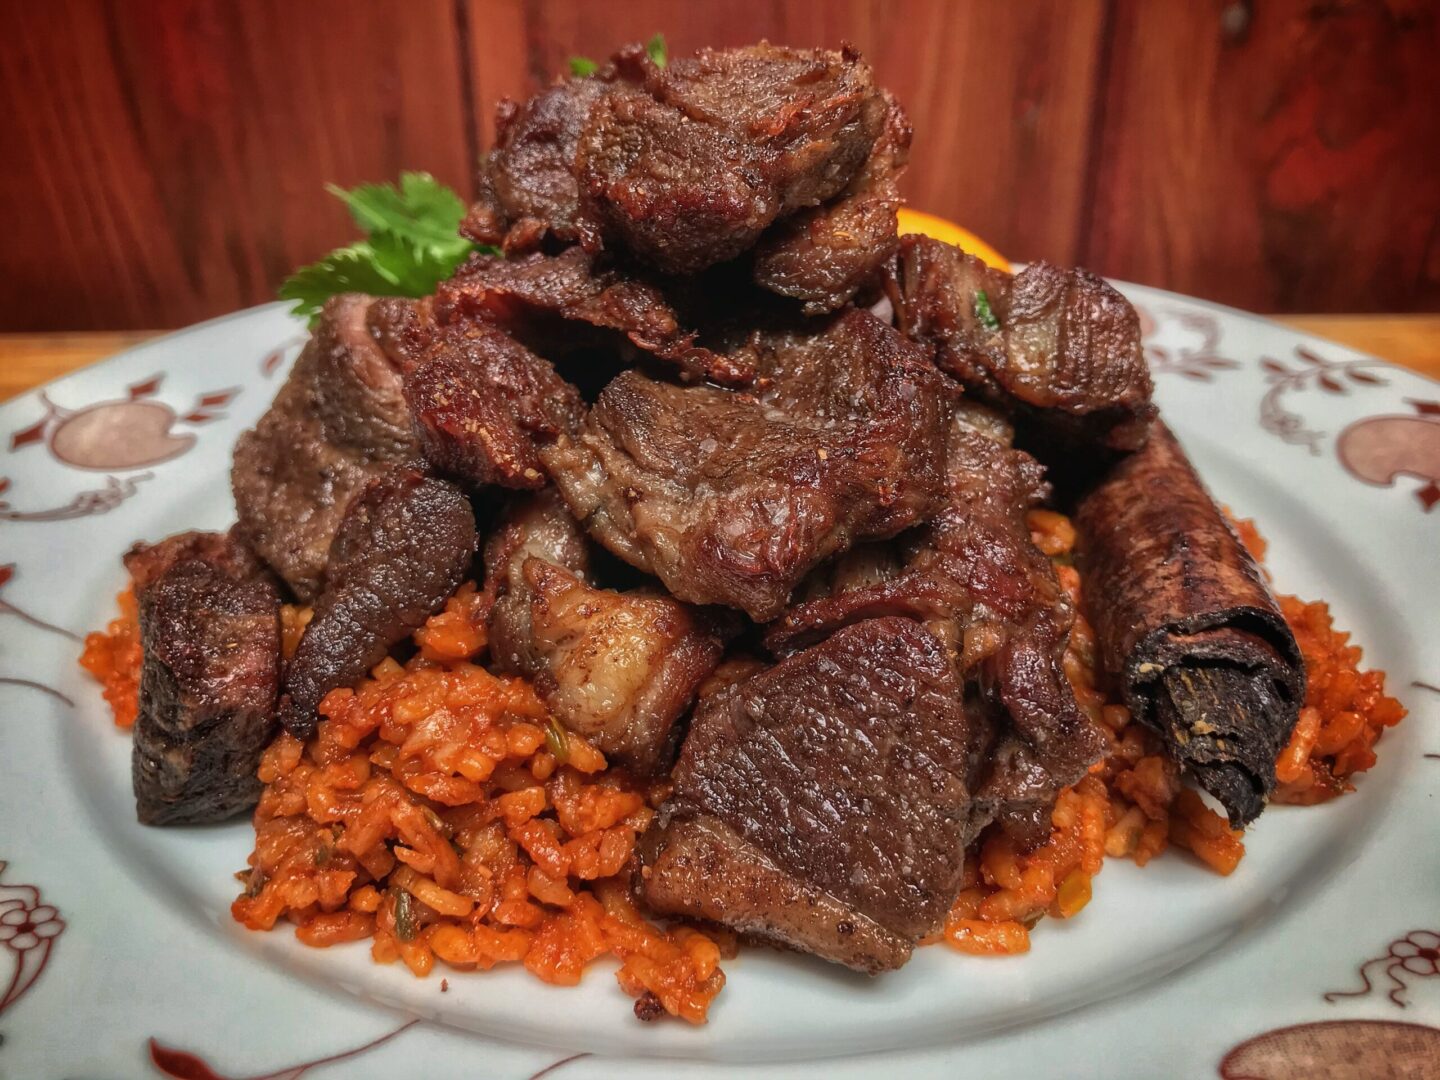 A plate of meat and rice on a wooden table.